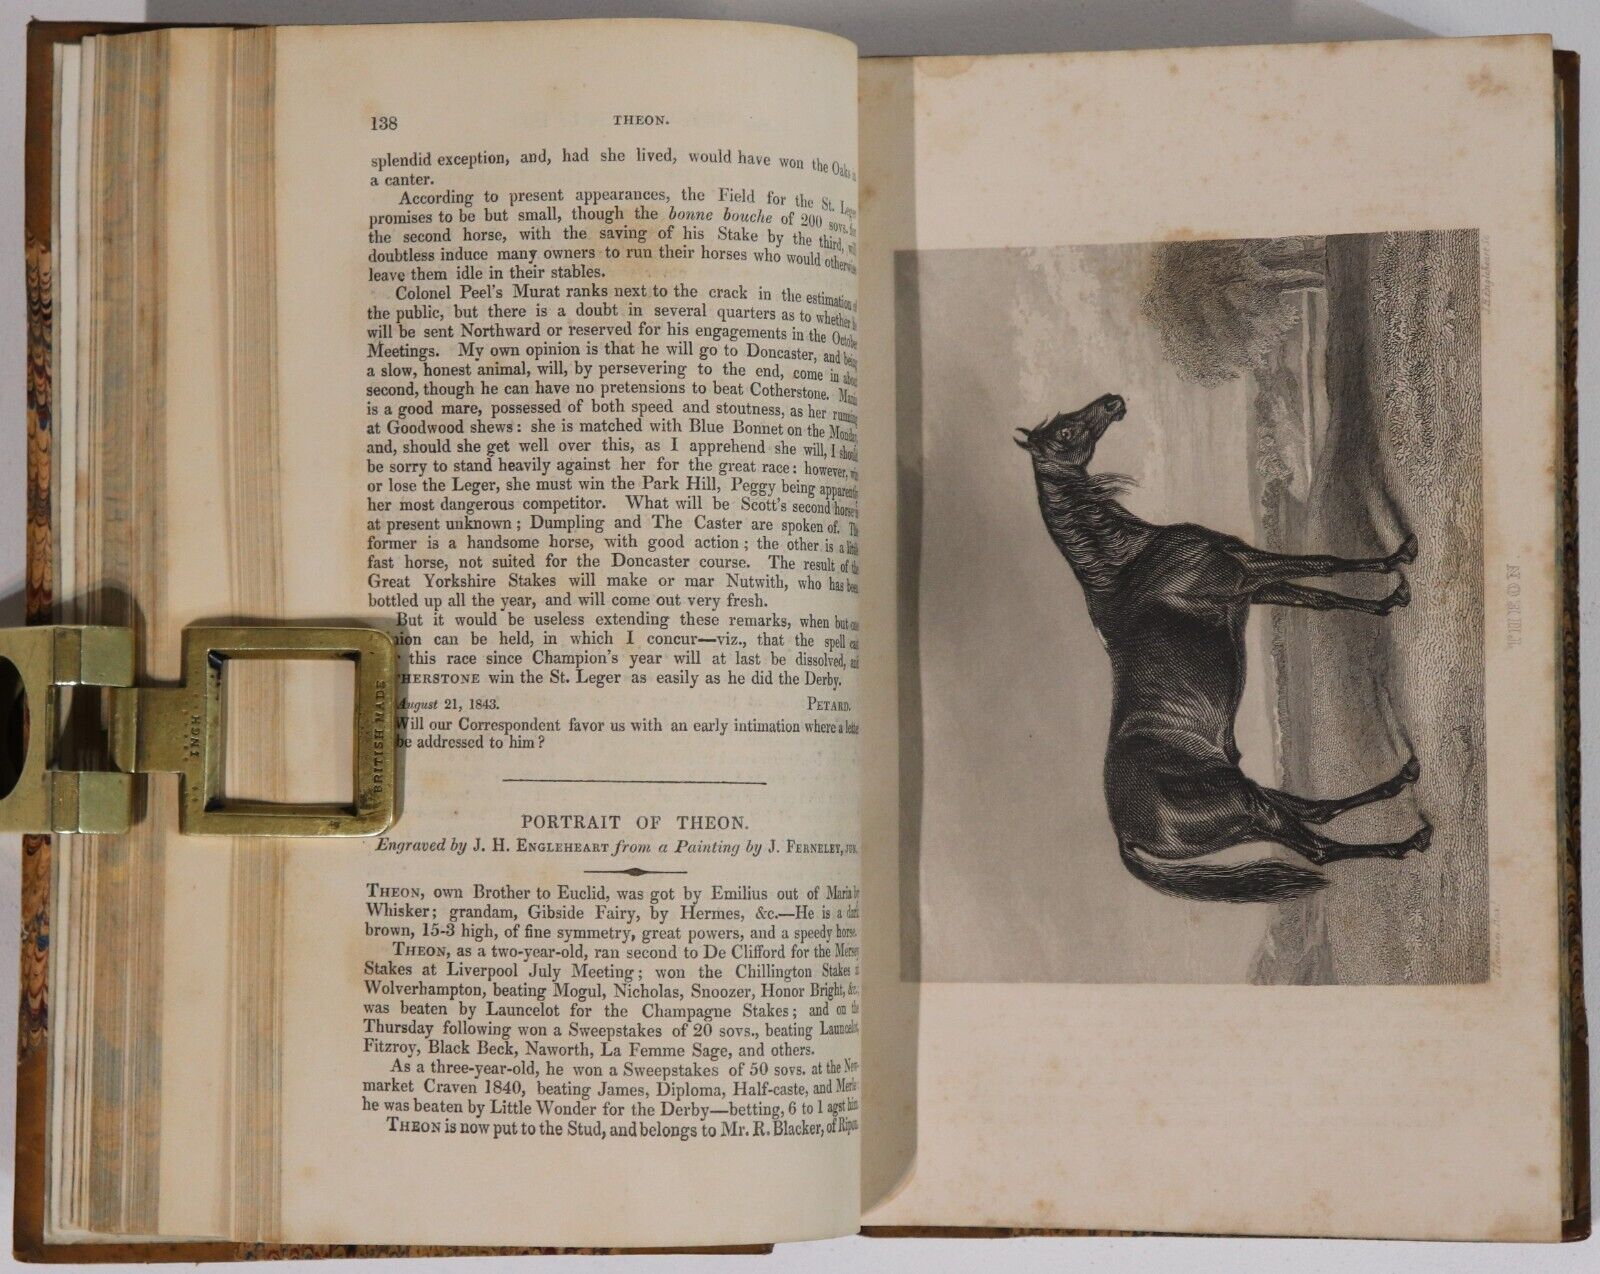 The Sporting Magazine - 1843 - Antiquarian Sport History Book